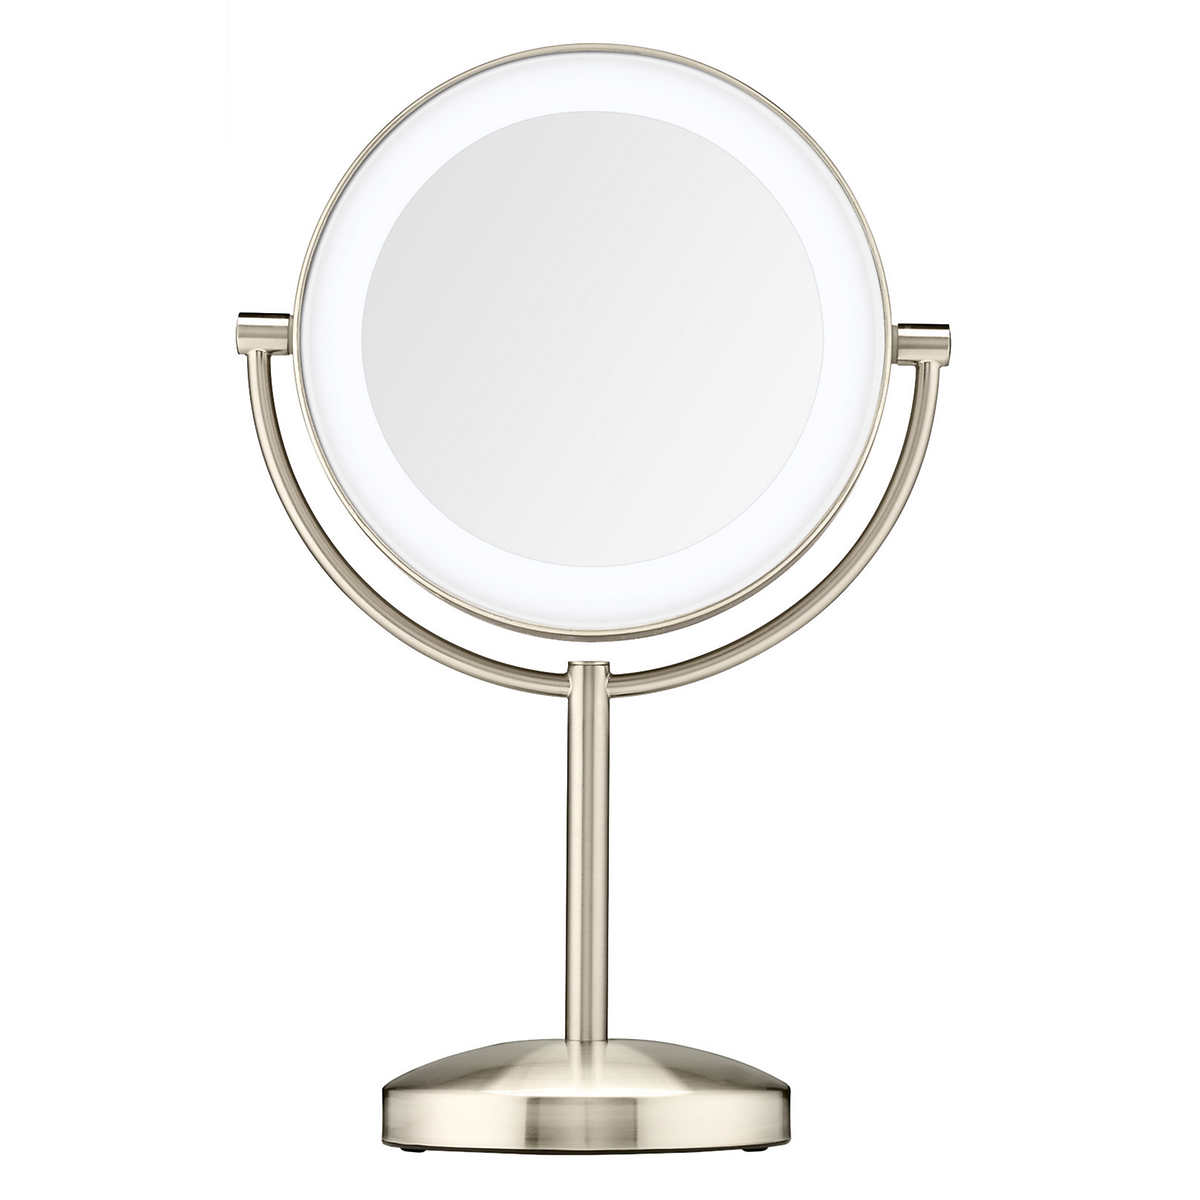 Reflections Led Lighted Mirror By, Conair Reflections Two Sided Lighted Makeup Mirror